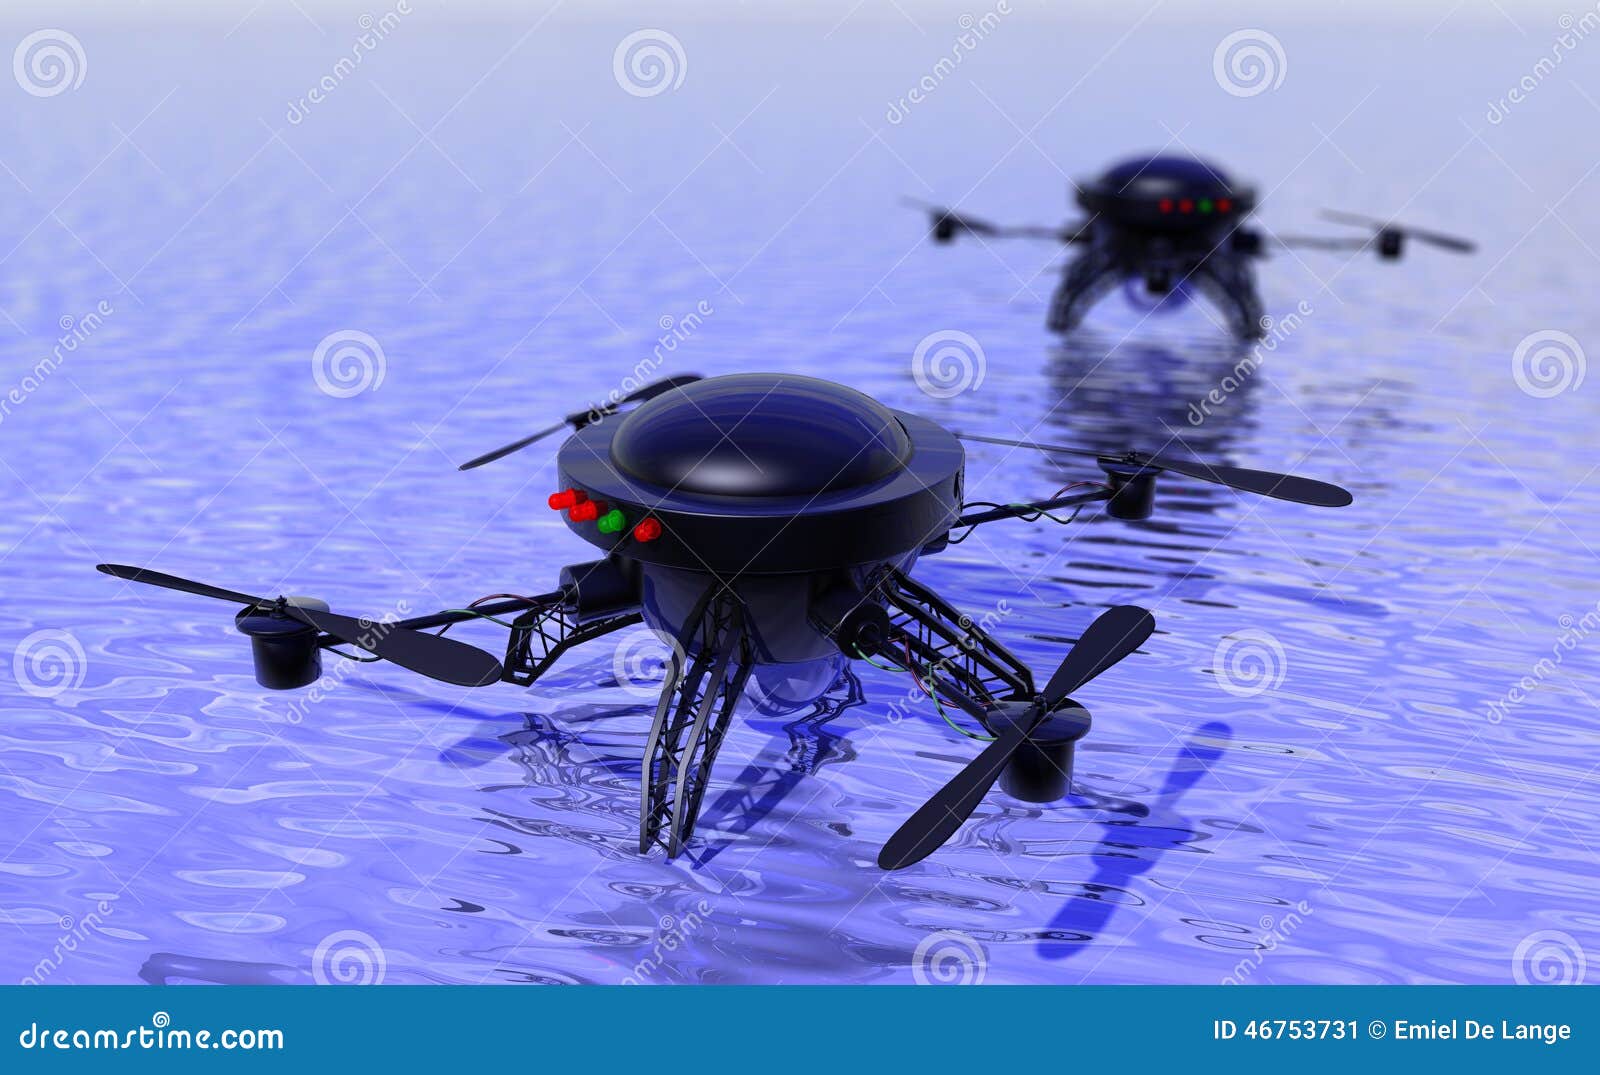 flying drones investigating water surface